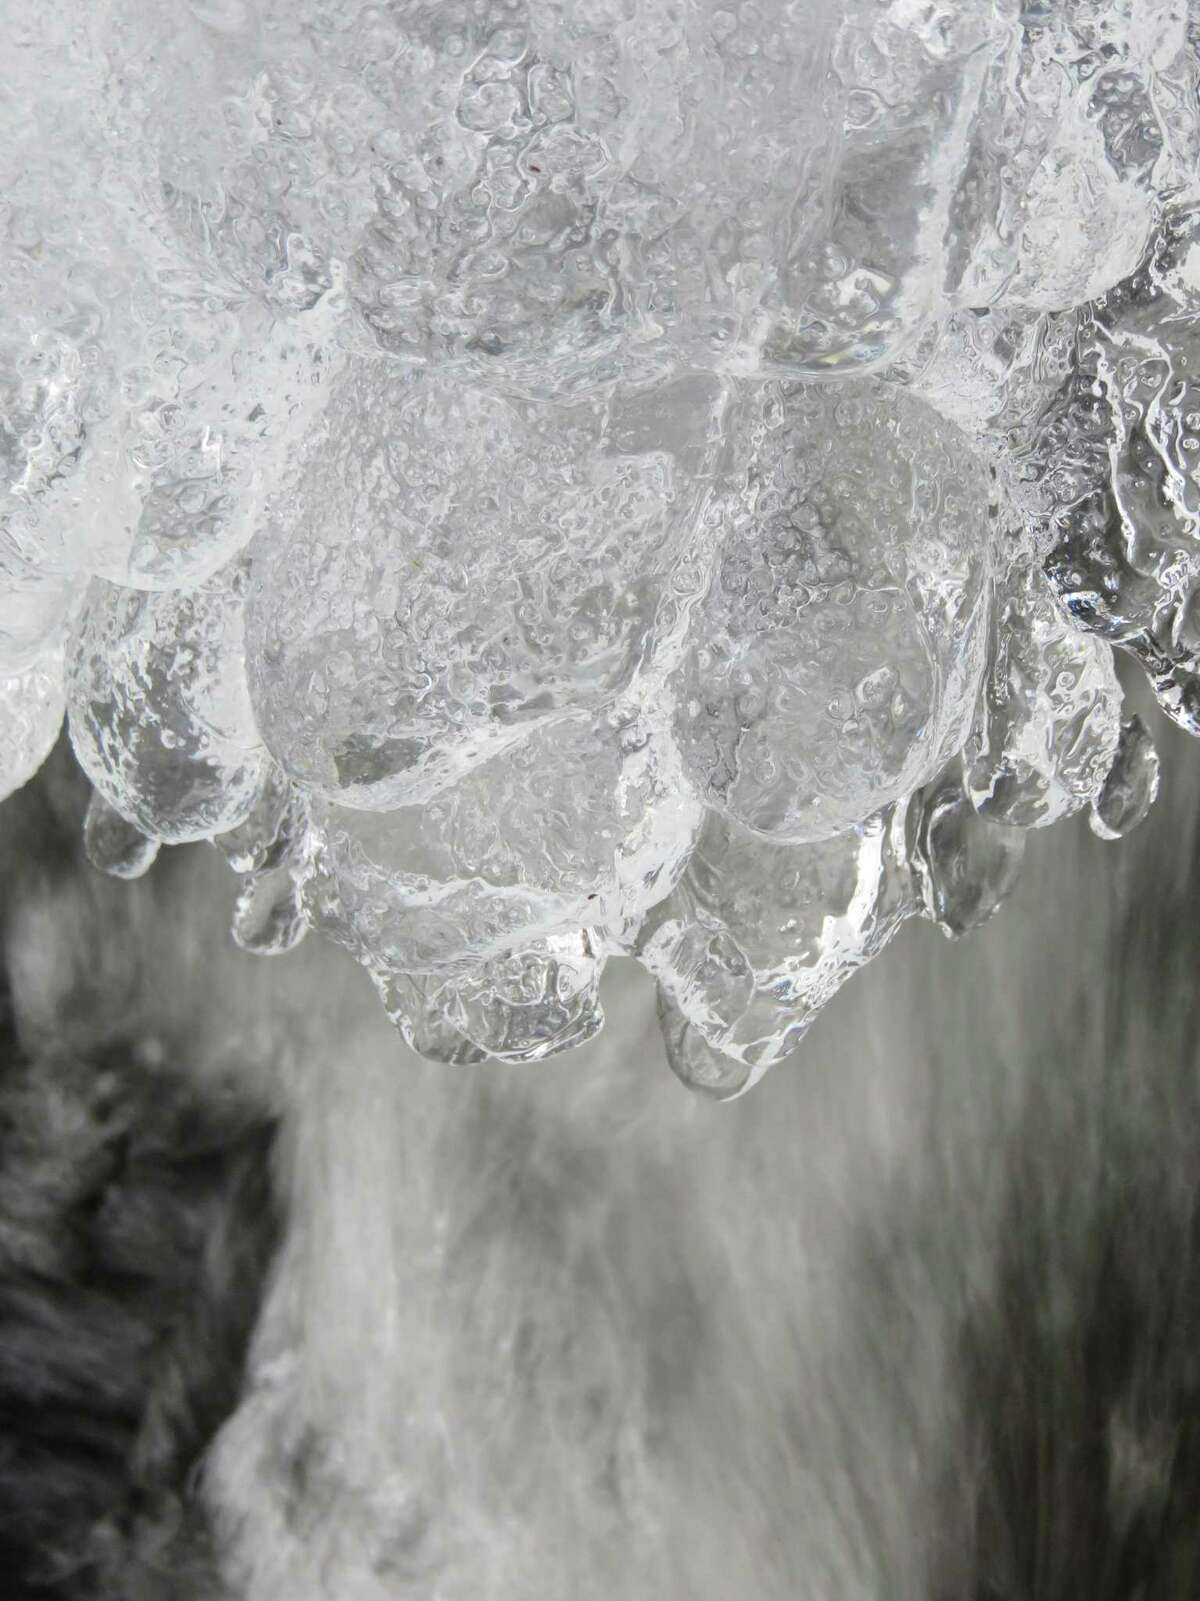 An ice formation on Rogers Brook, a possible route of the North Country Scenic Trail. (Herb Terns / Times Union)